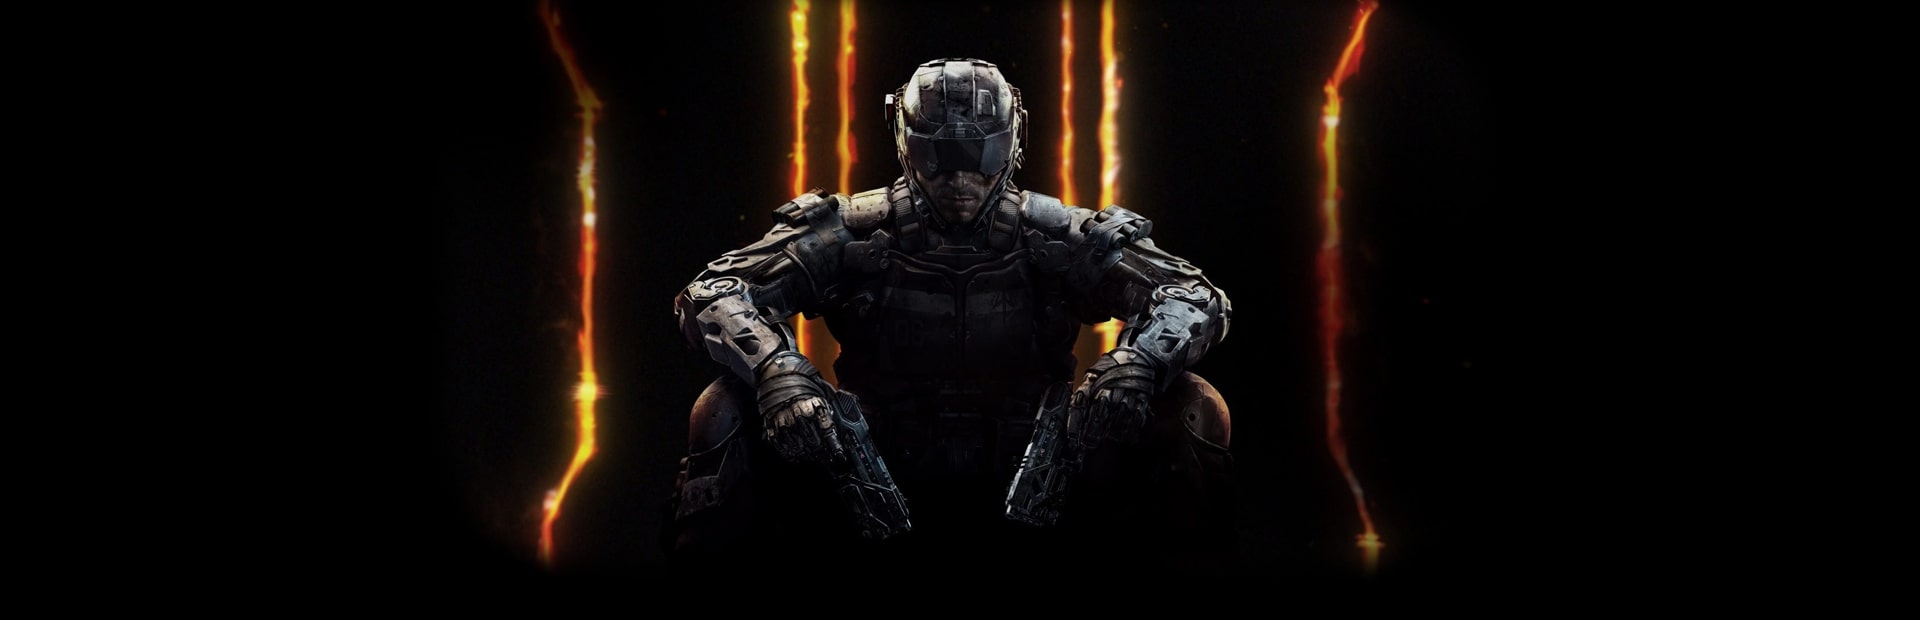 Call of Duty: Black Ops III Review – Engaging, Exciting, and Fun!